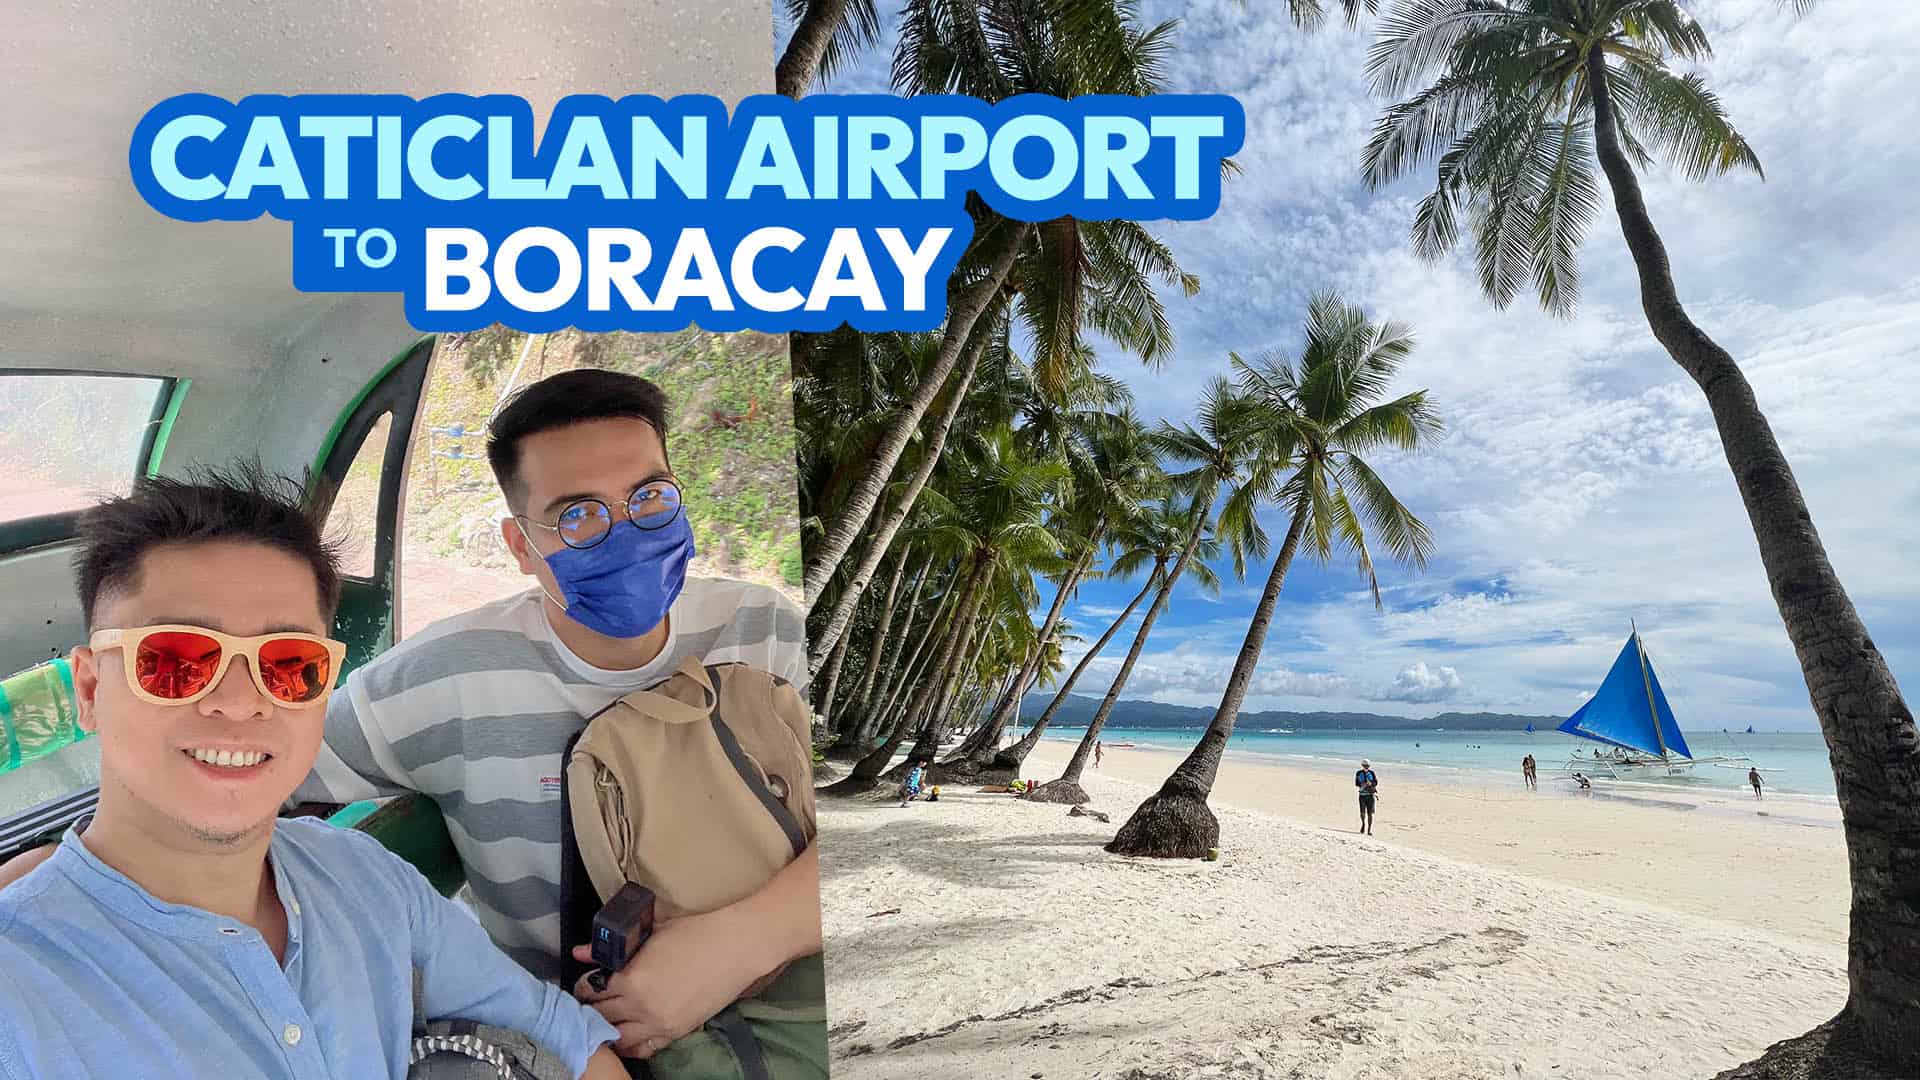 2023 CATICLAN AIRPORT TO BORACAY Journey Information